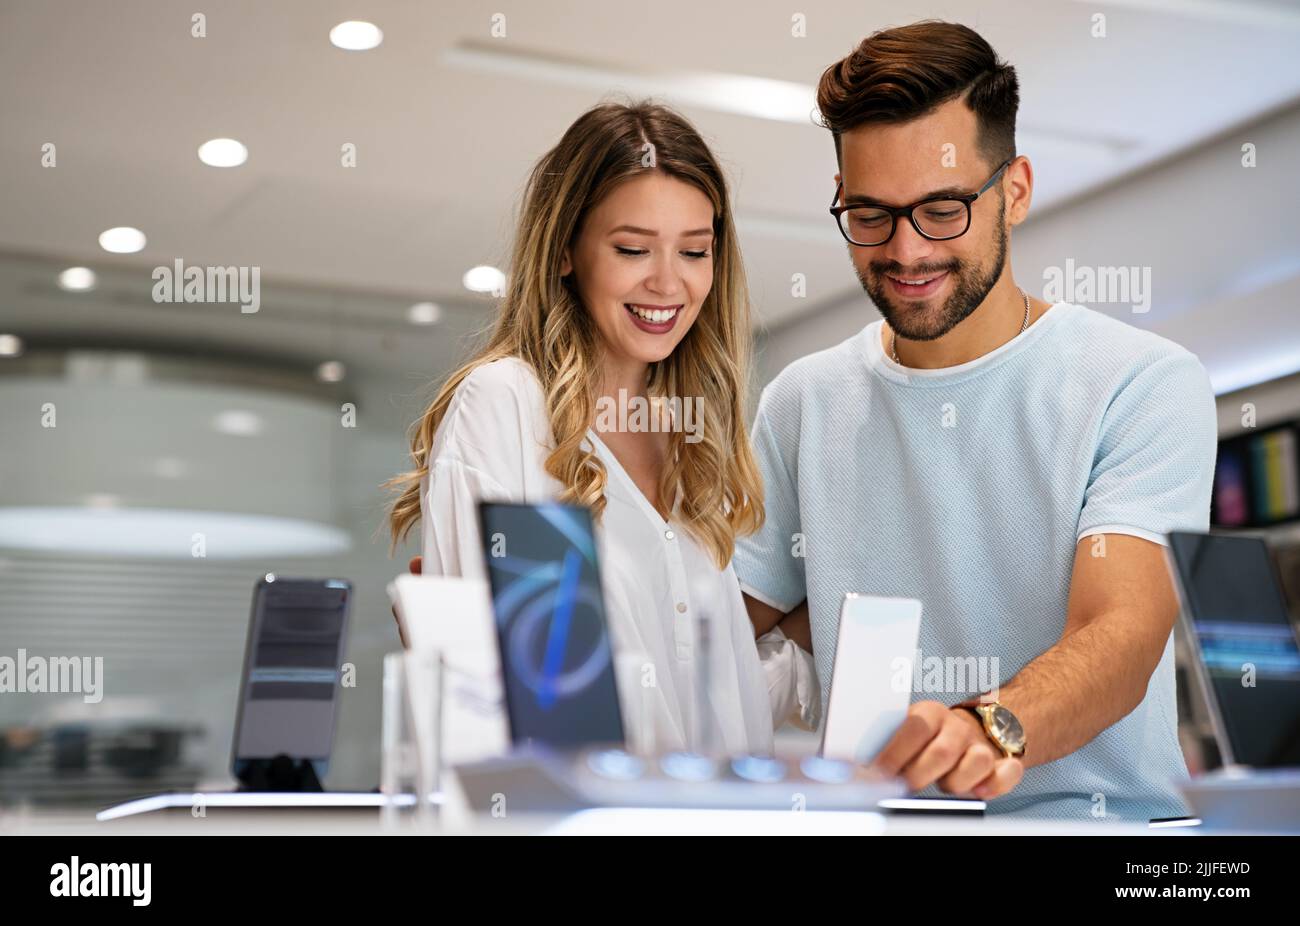 Shopping a new digital device. Happy couple buying a smartphone in store. Stock Photo